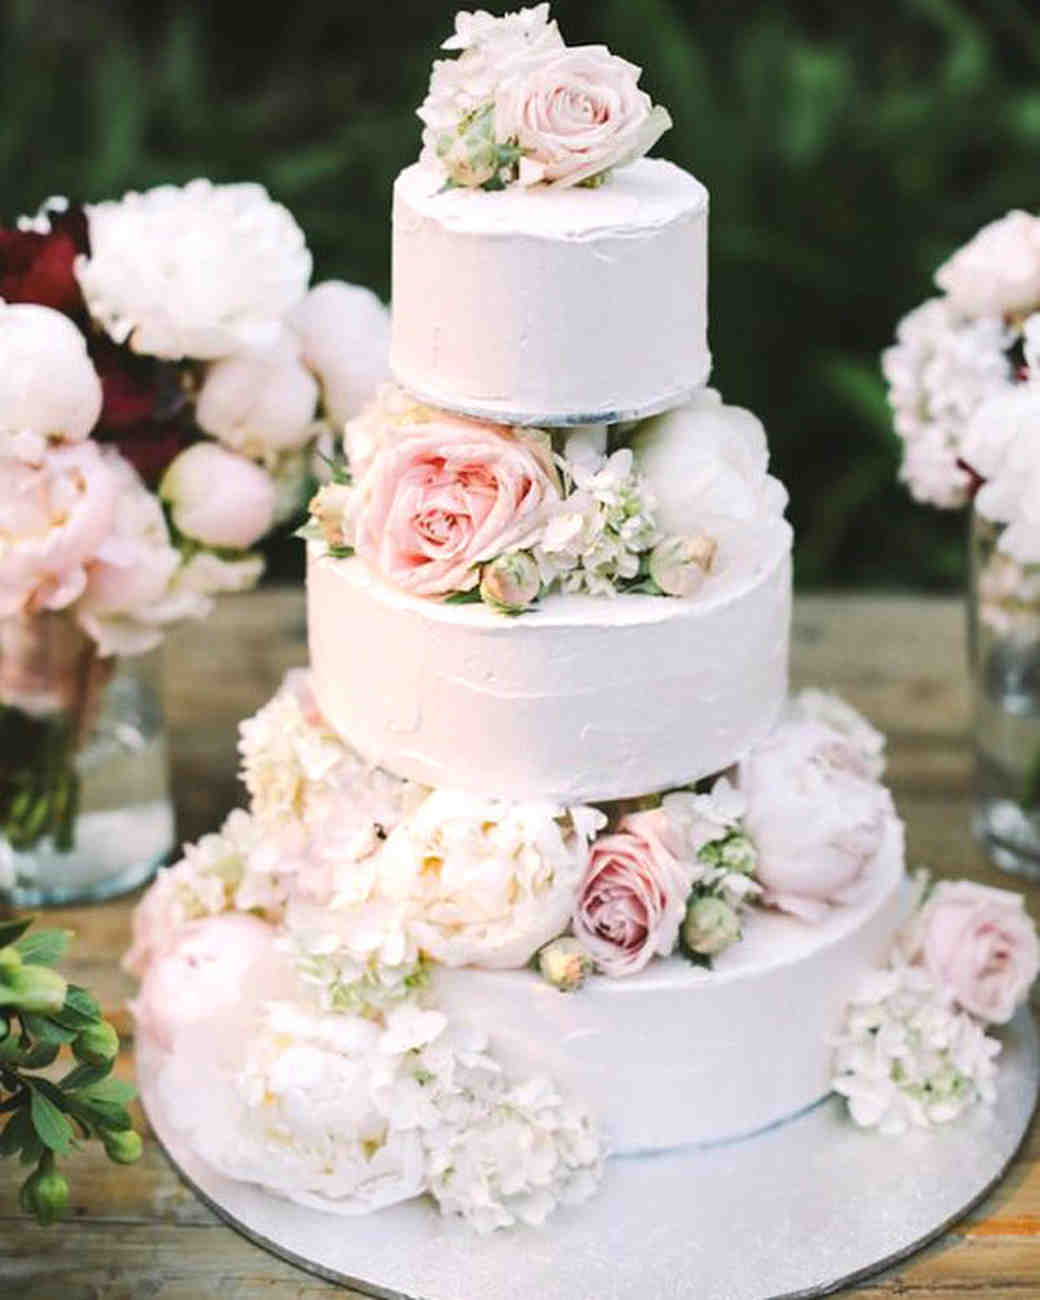 Trending Now: Wedding Cakes with Floral Tiers | Martha Stewart Weddings